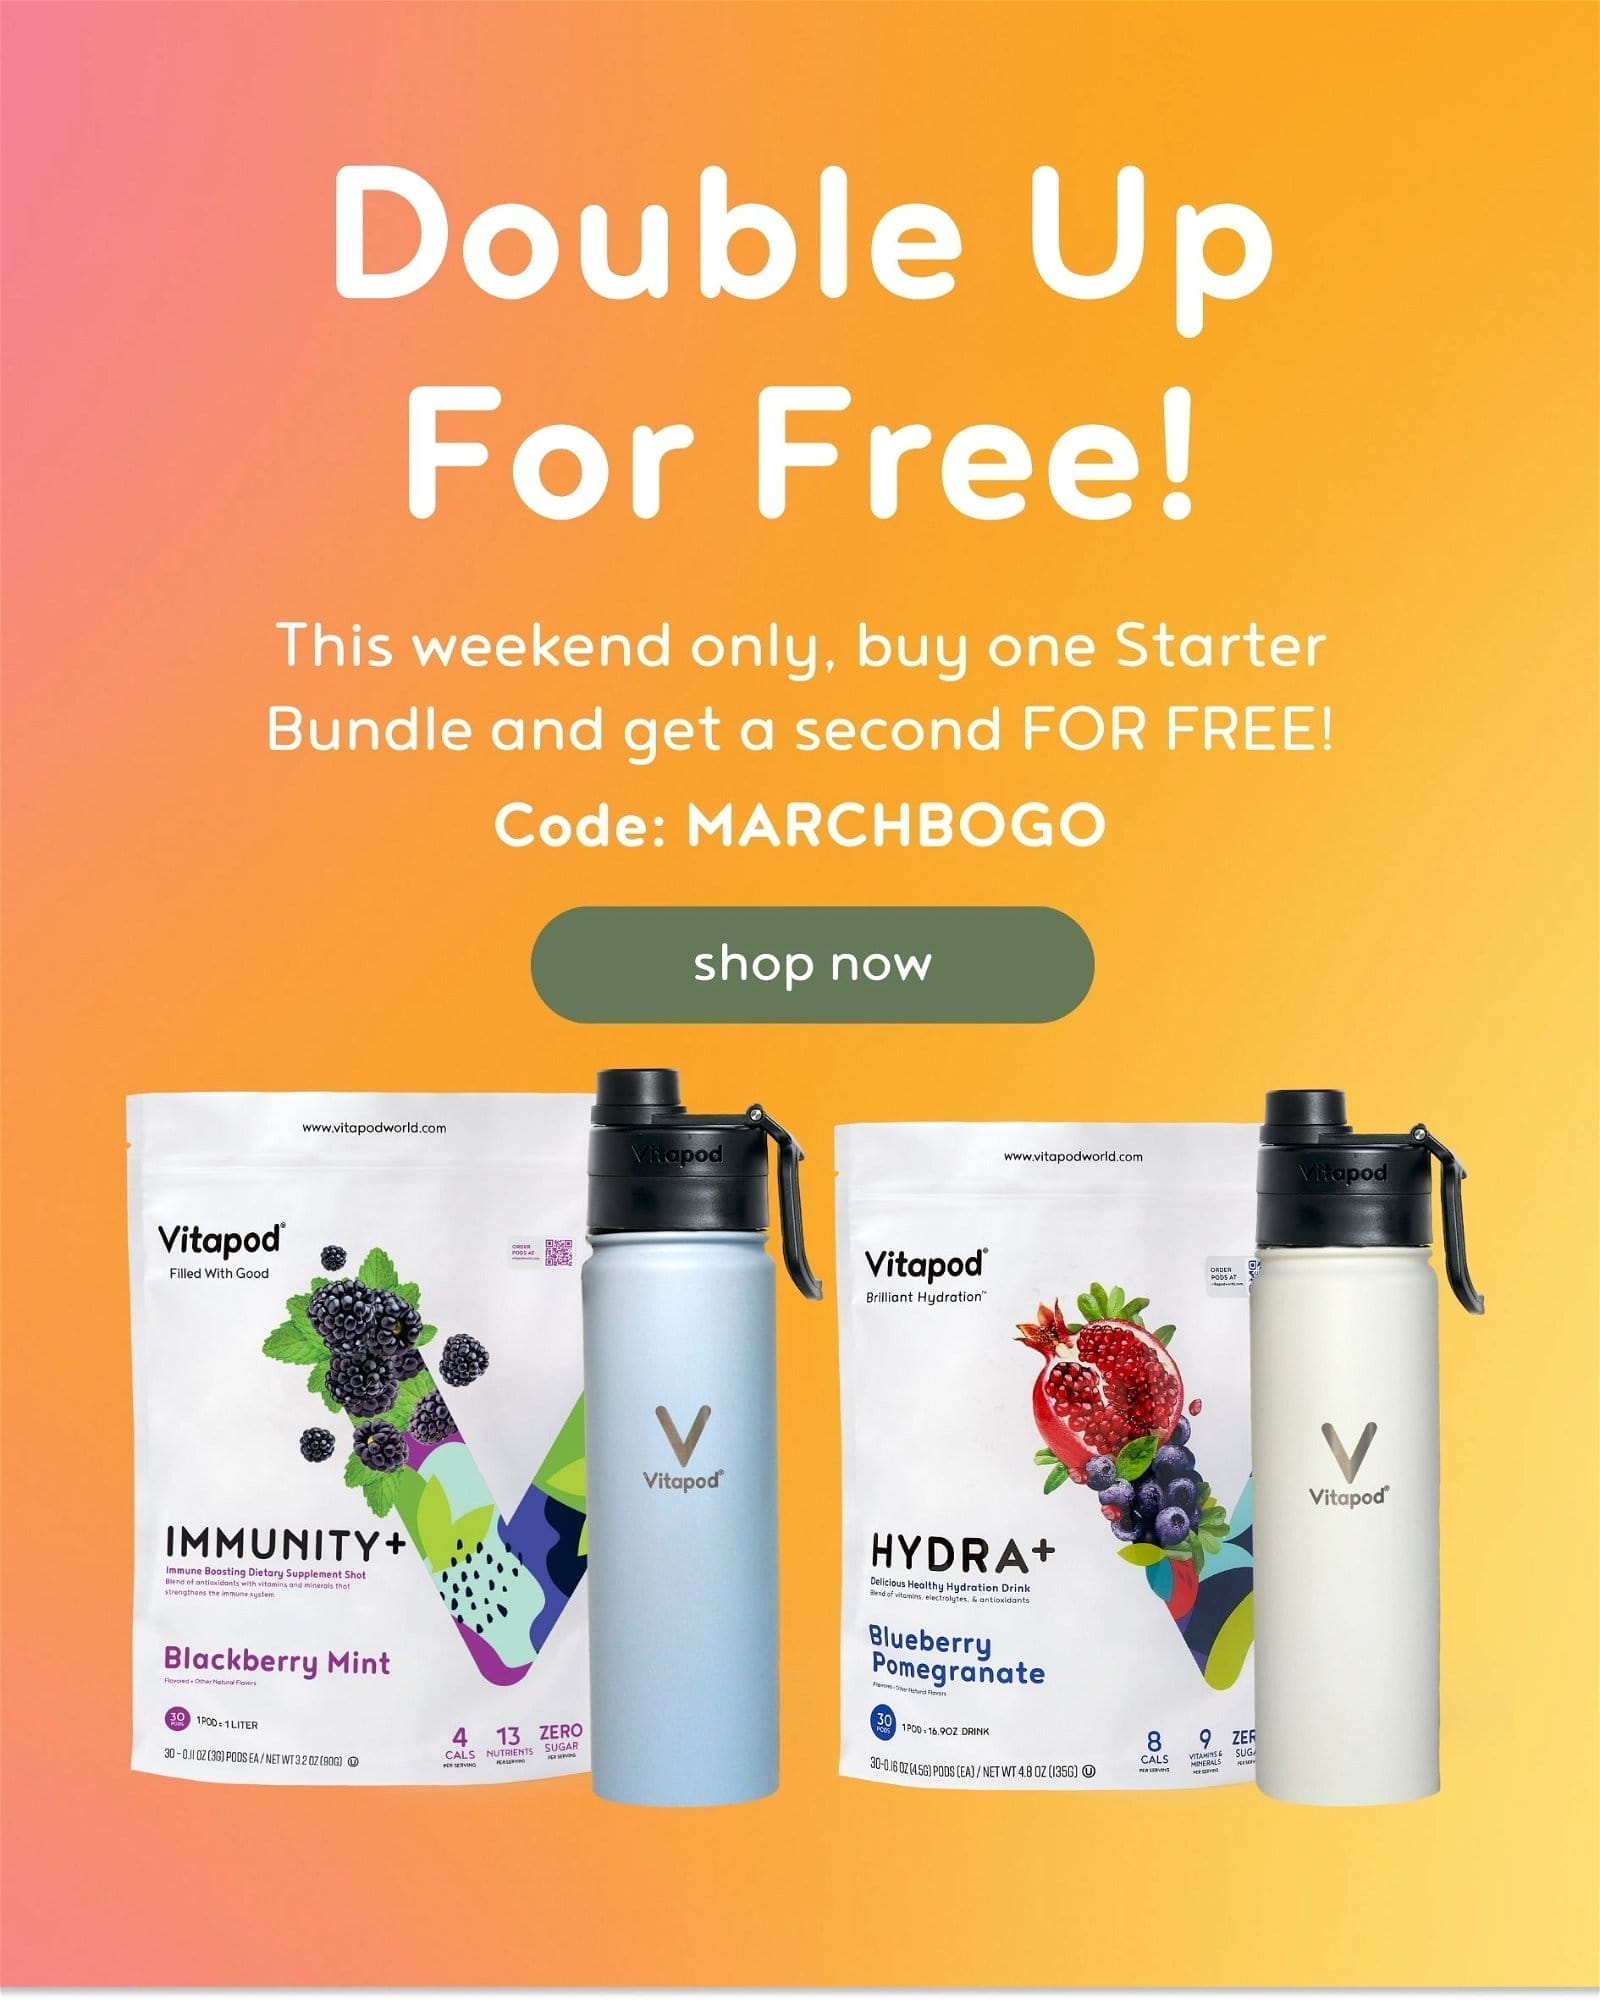 This weekend only, buy one Starter Bundle and get a second FOR FREE! Code: MARCHBOGO